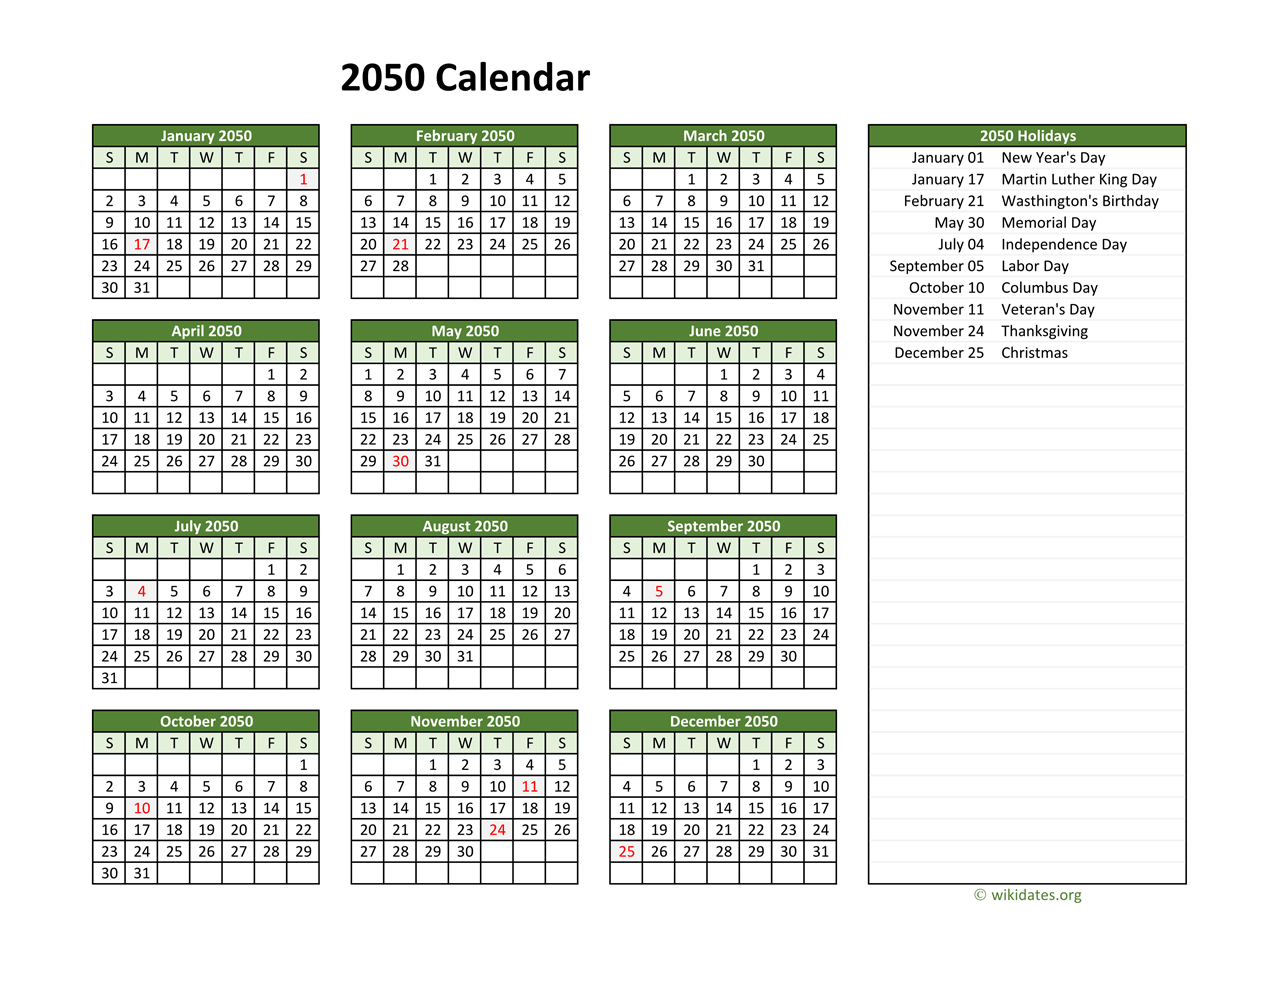 printable-2050-calendar-with-federal-holidays-wikidates